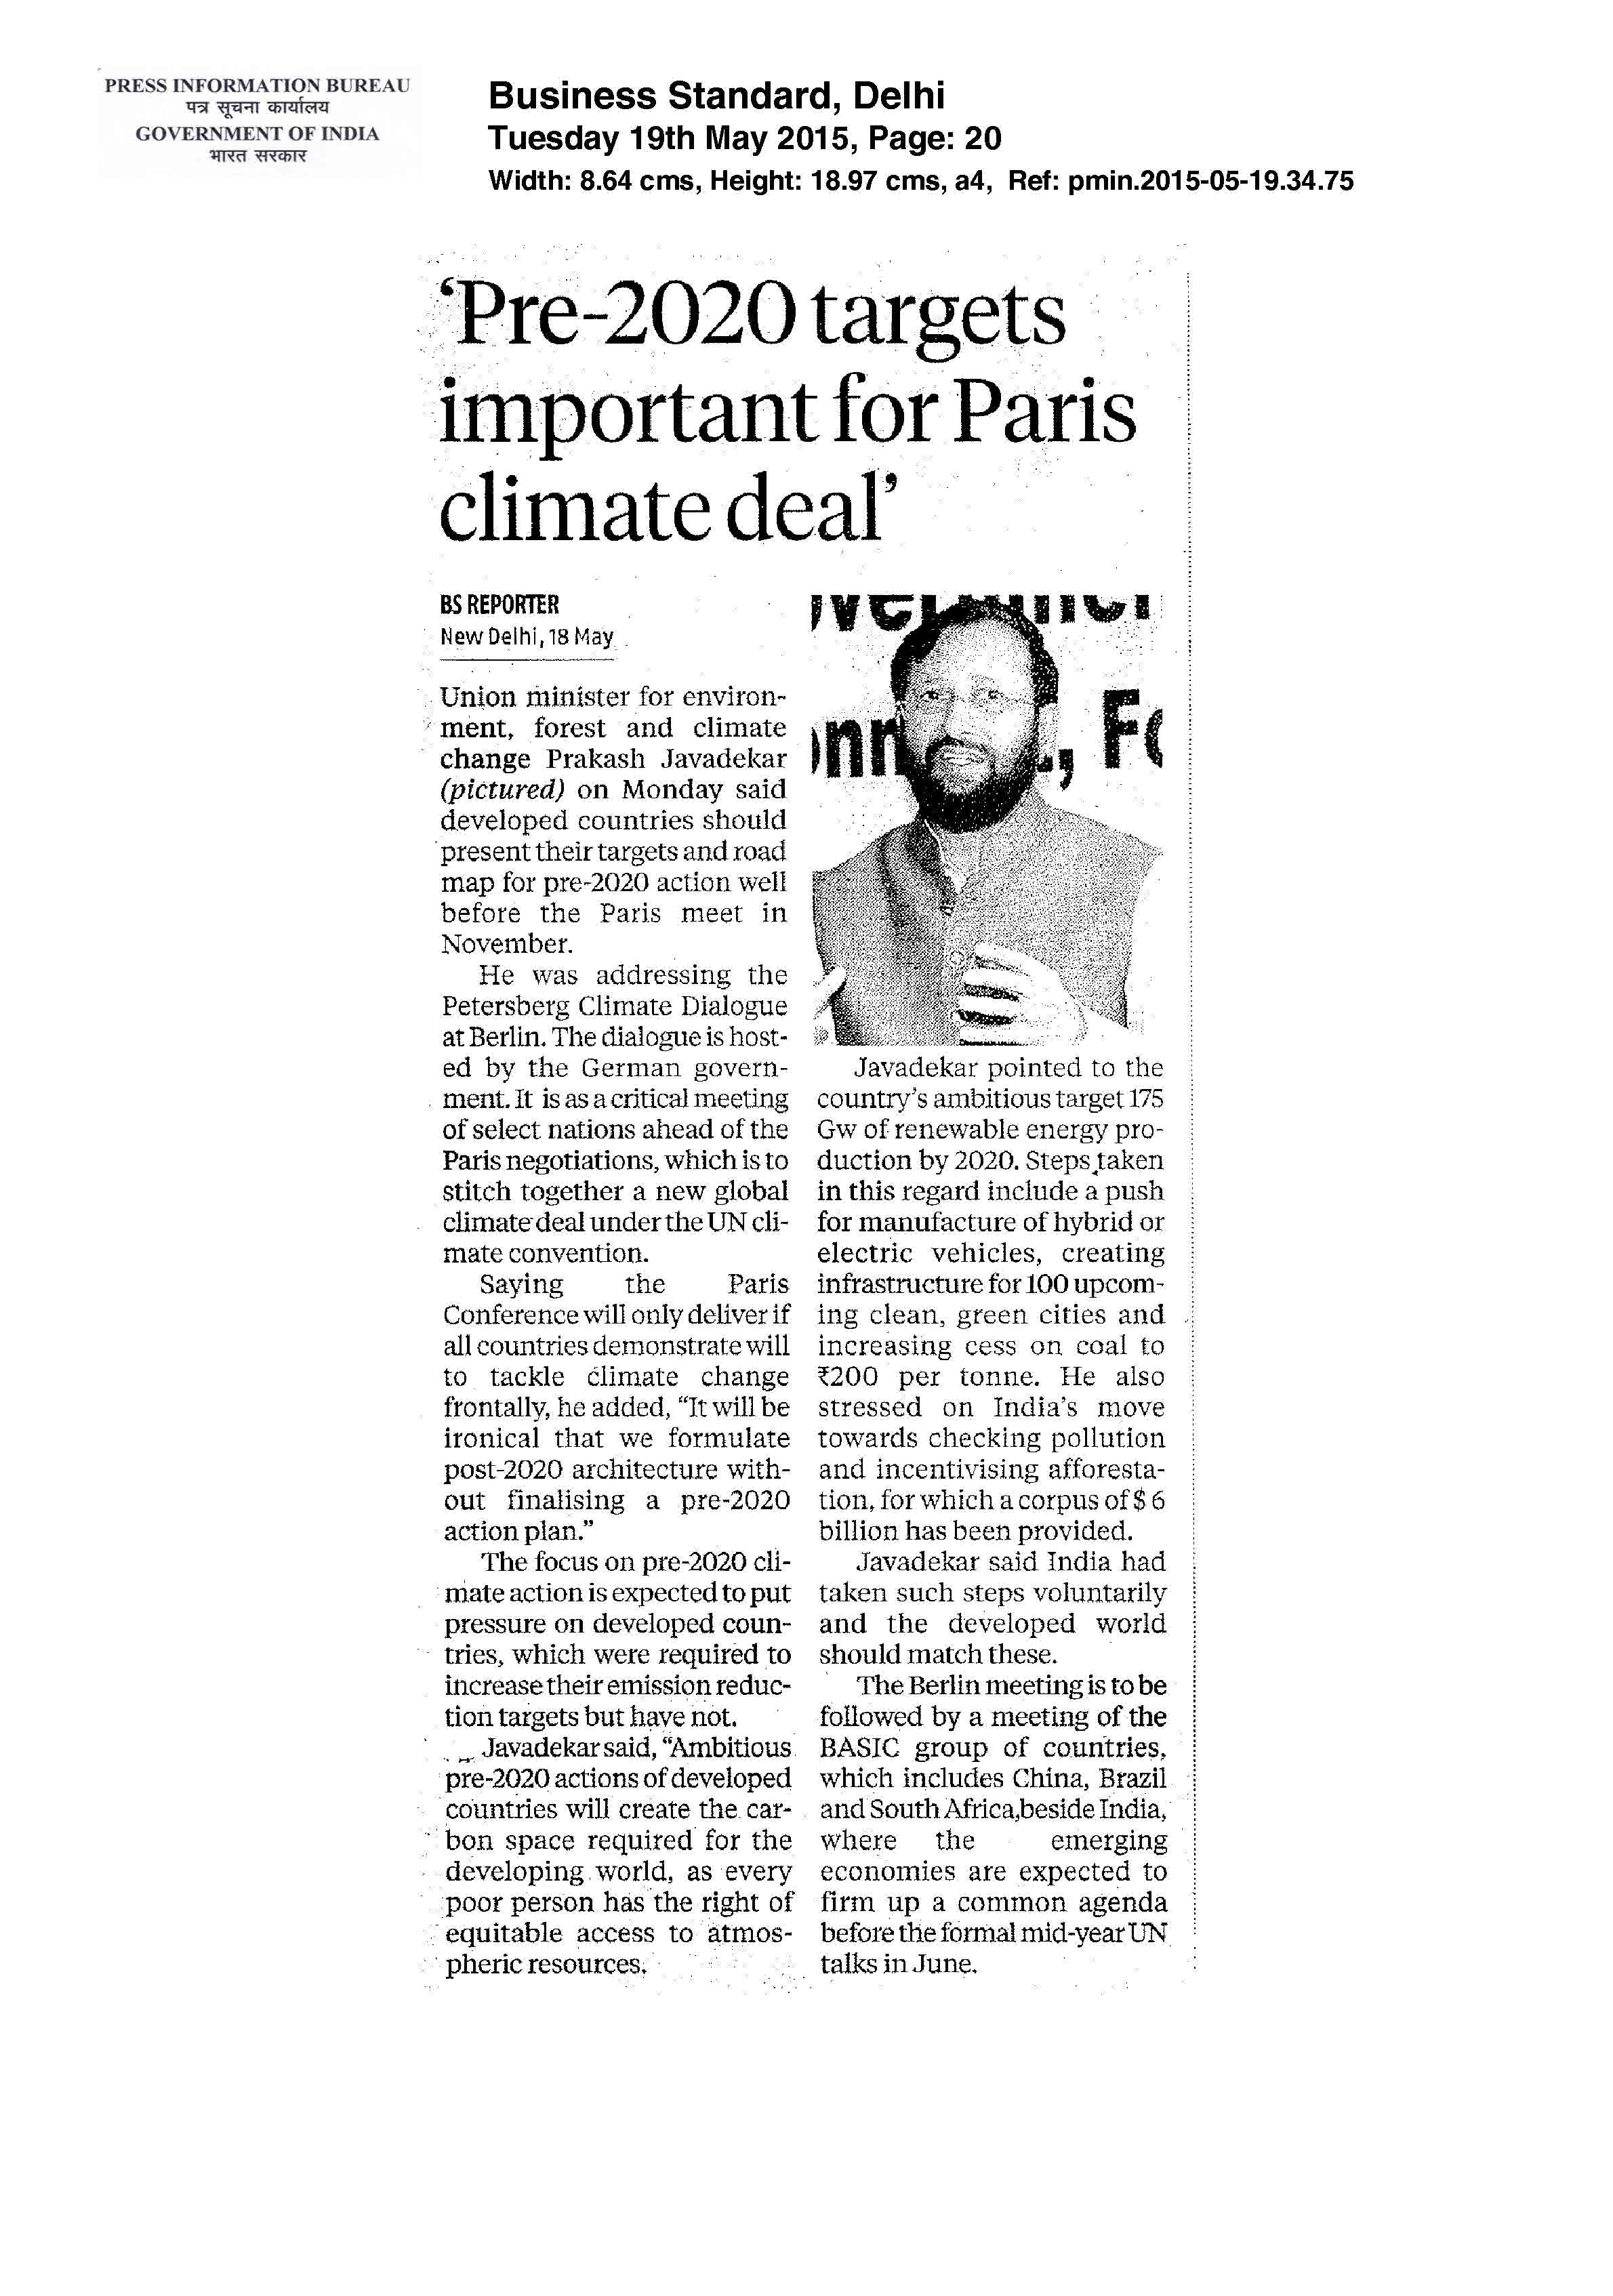 Prakash on Twitter: coverage relating to climate dialogue / Twitter